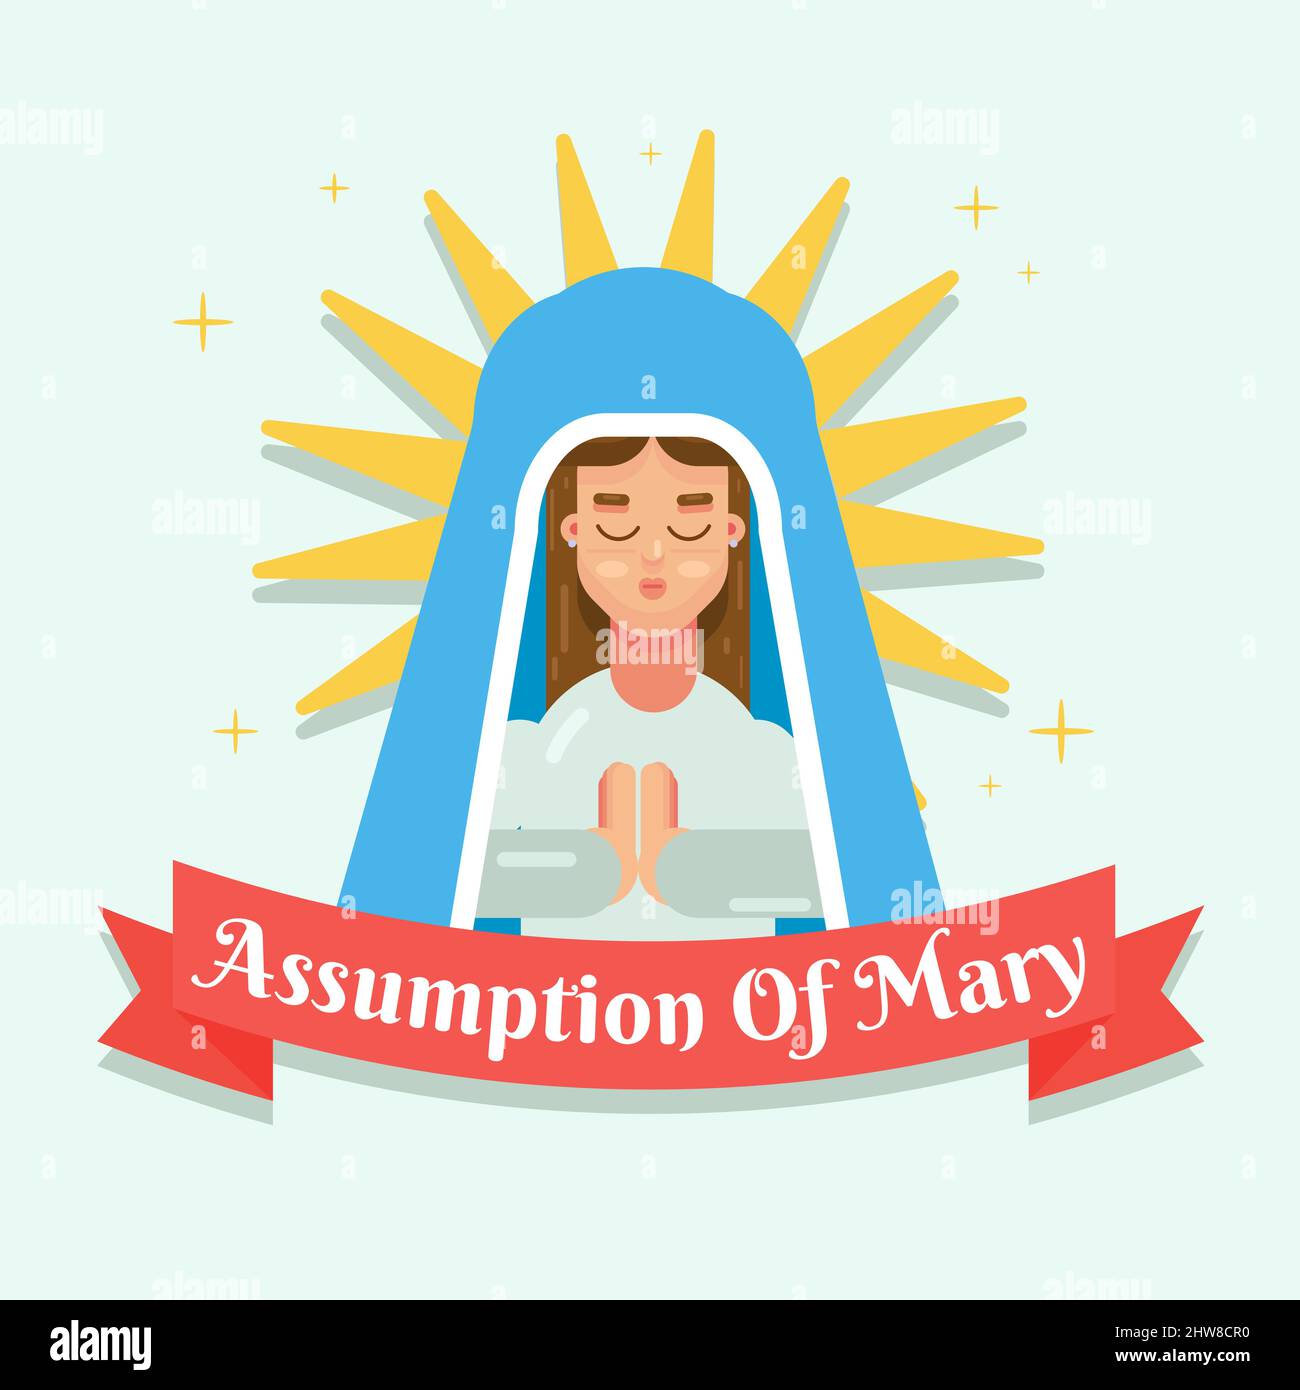 Assumption of Mary day vector illustration design Stock Vector